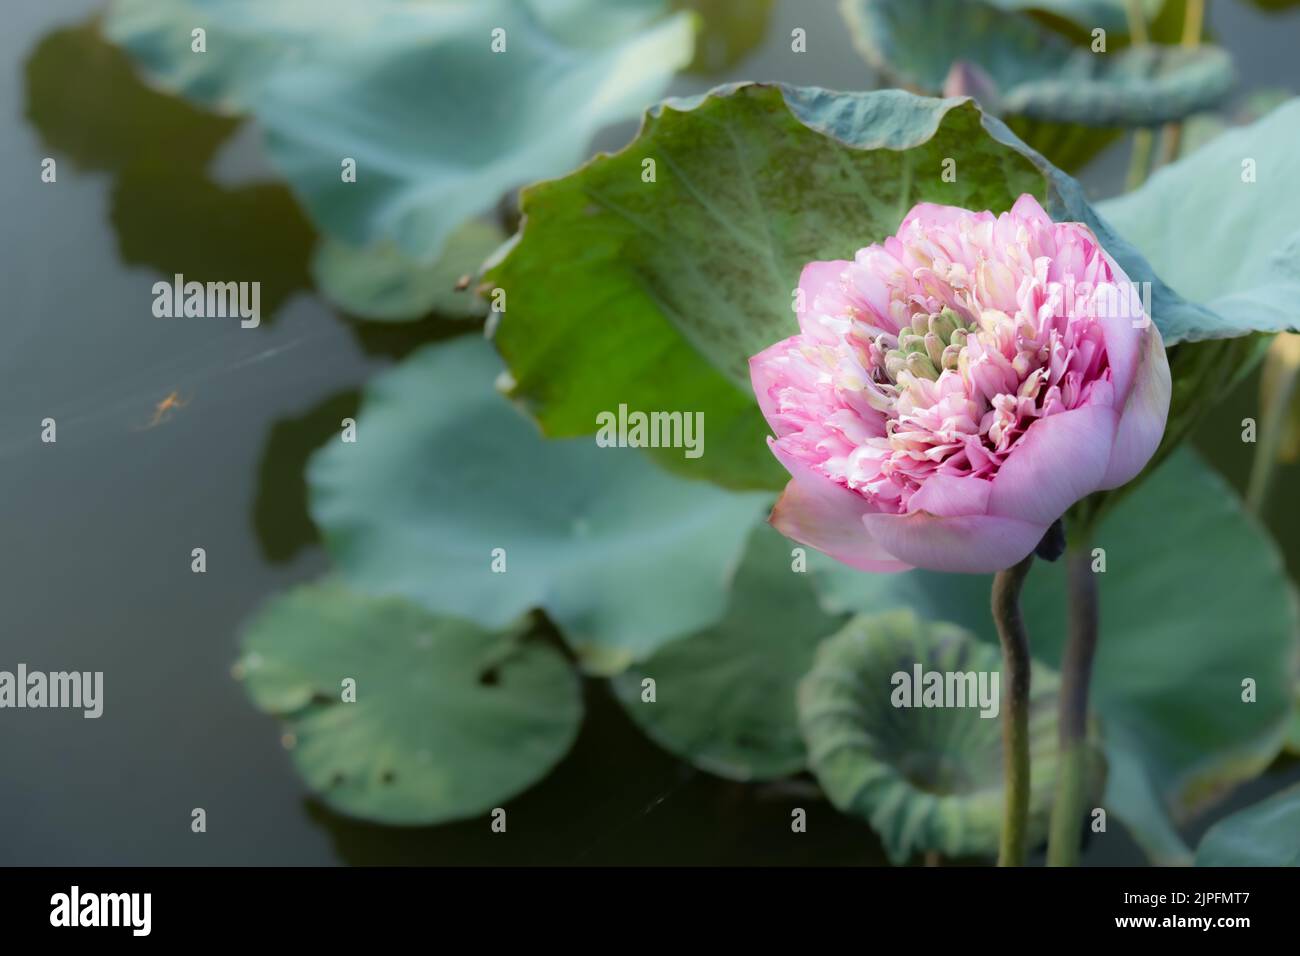 blooming lotus flower in a pond Stock Photo